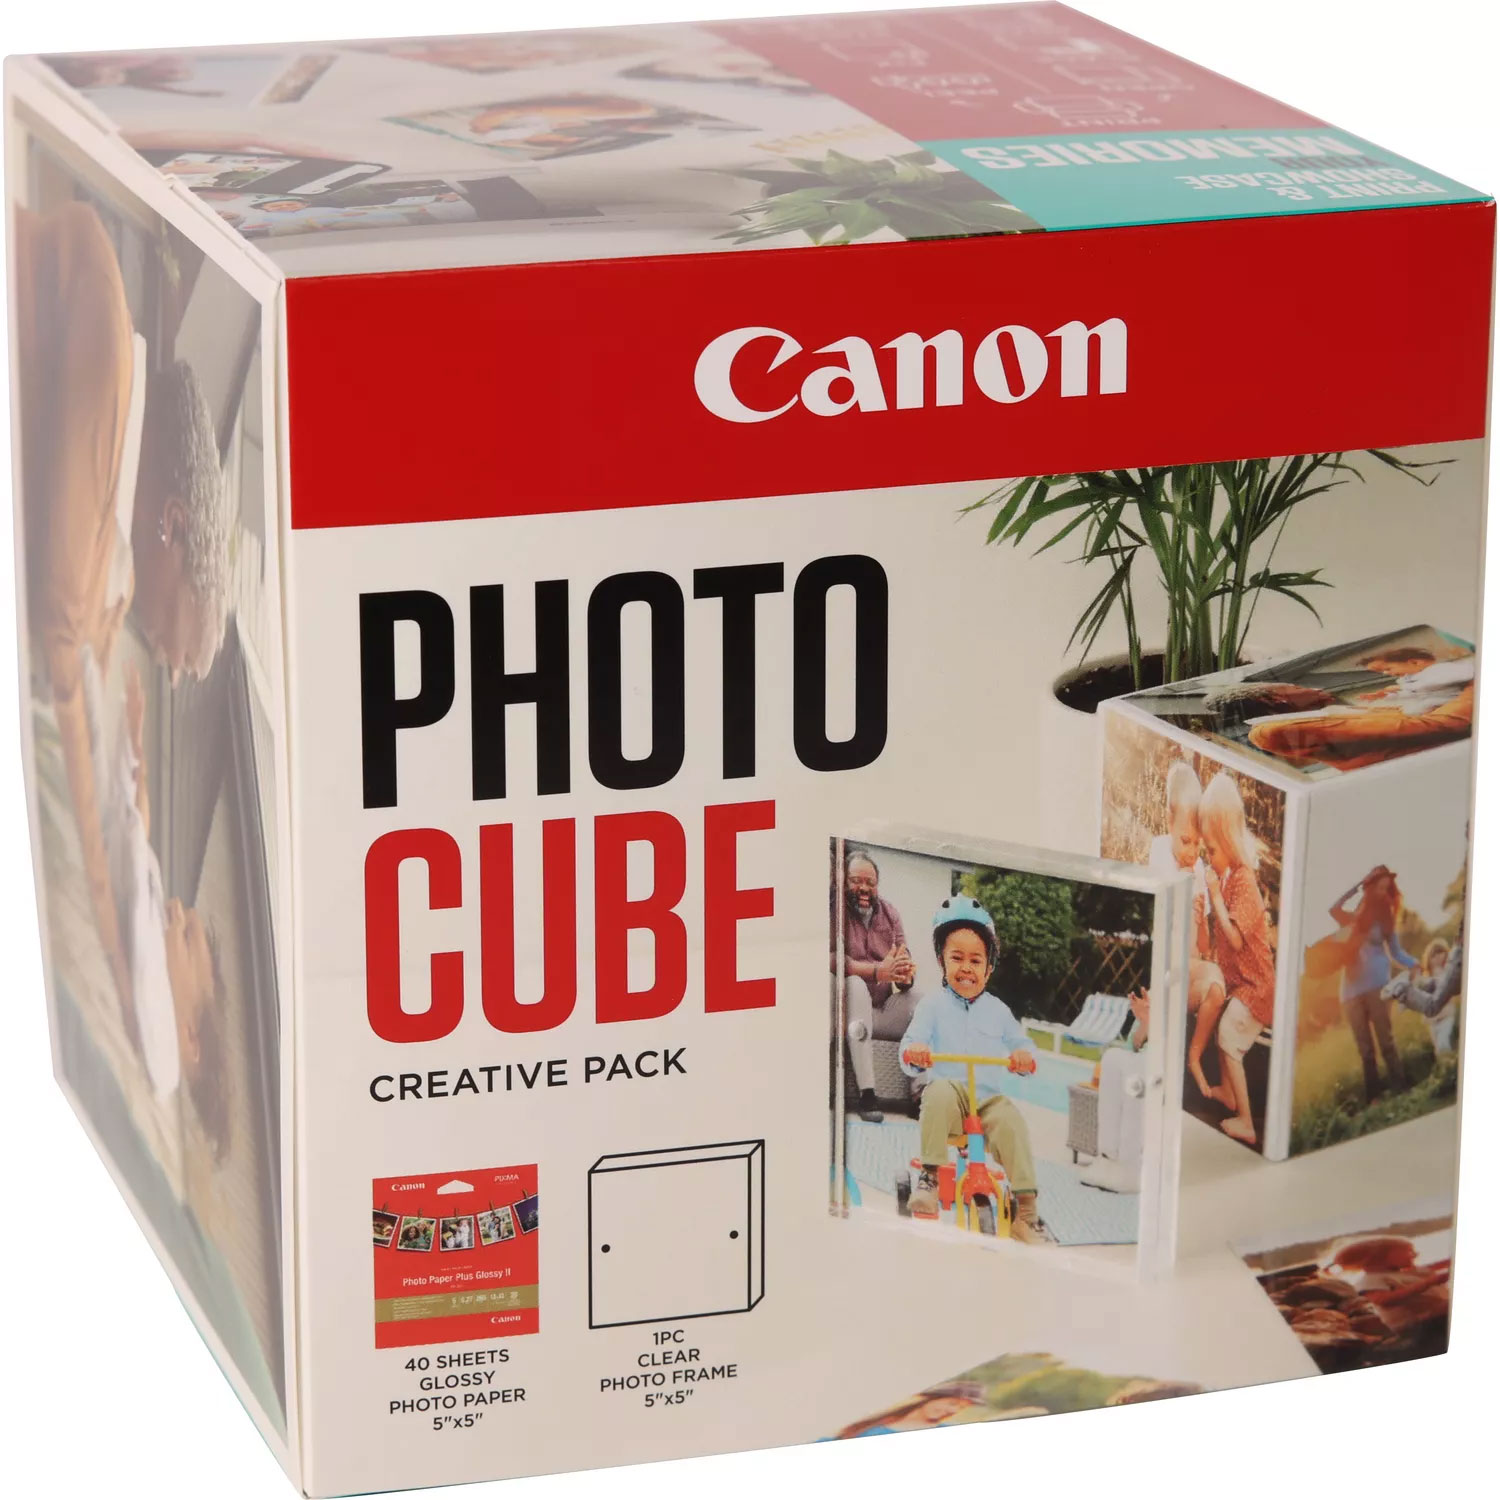 Original Canon Photo Cube and Frame + PP-201 5x5? Photo Paper Plus Glossy II (40 sheets) Pack Blue (2311B076)